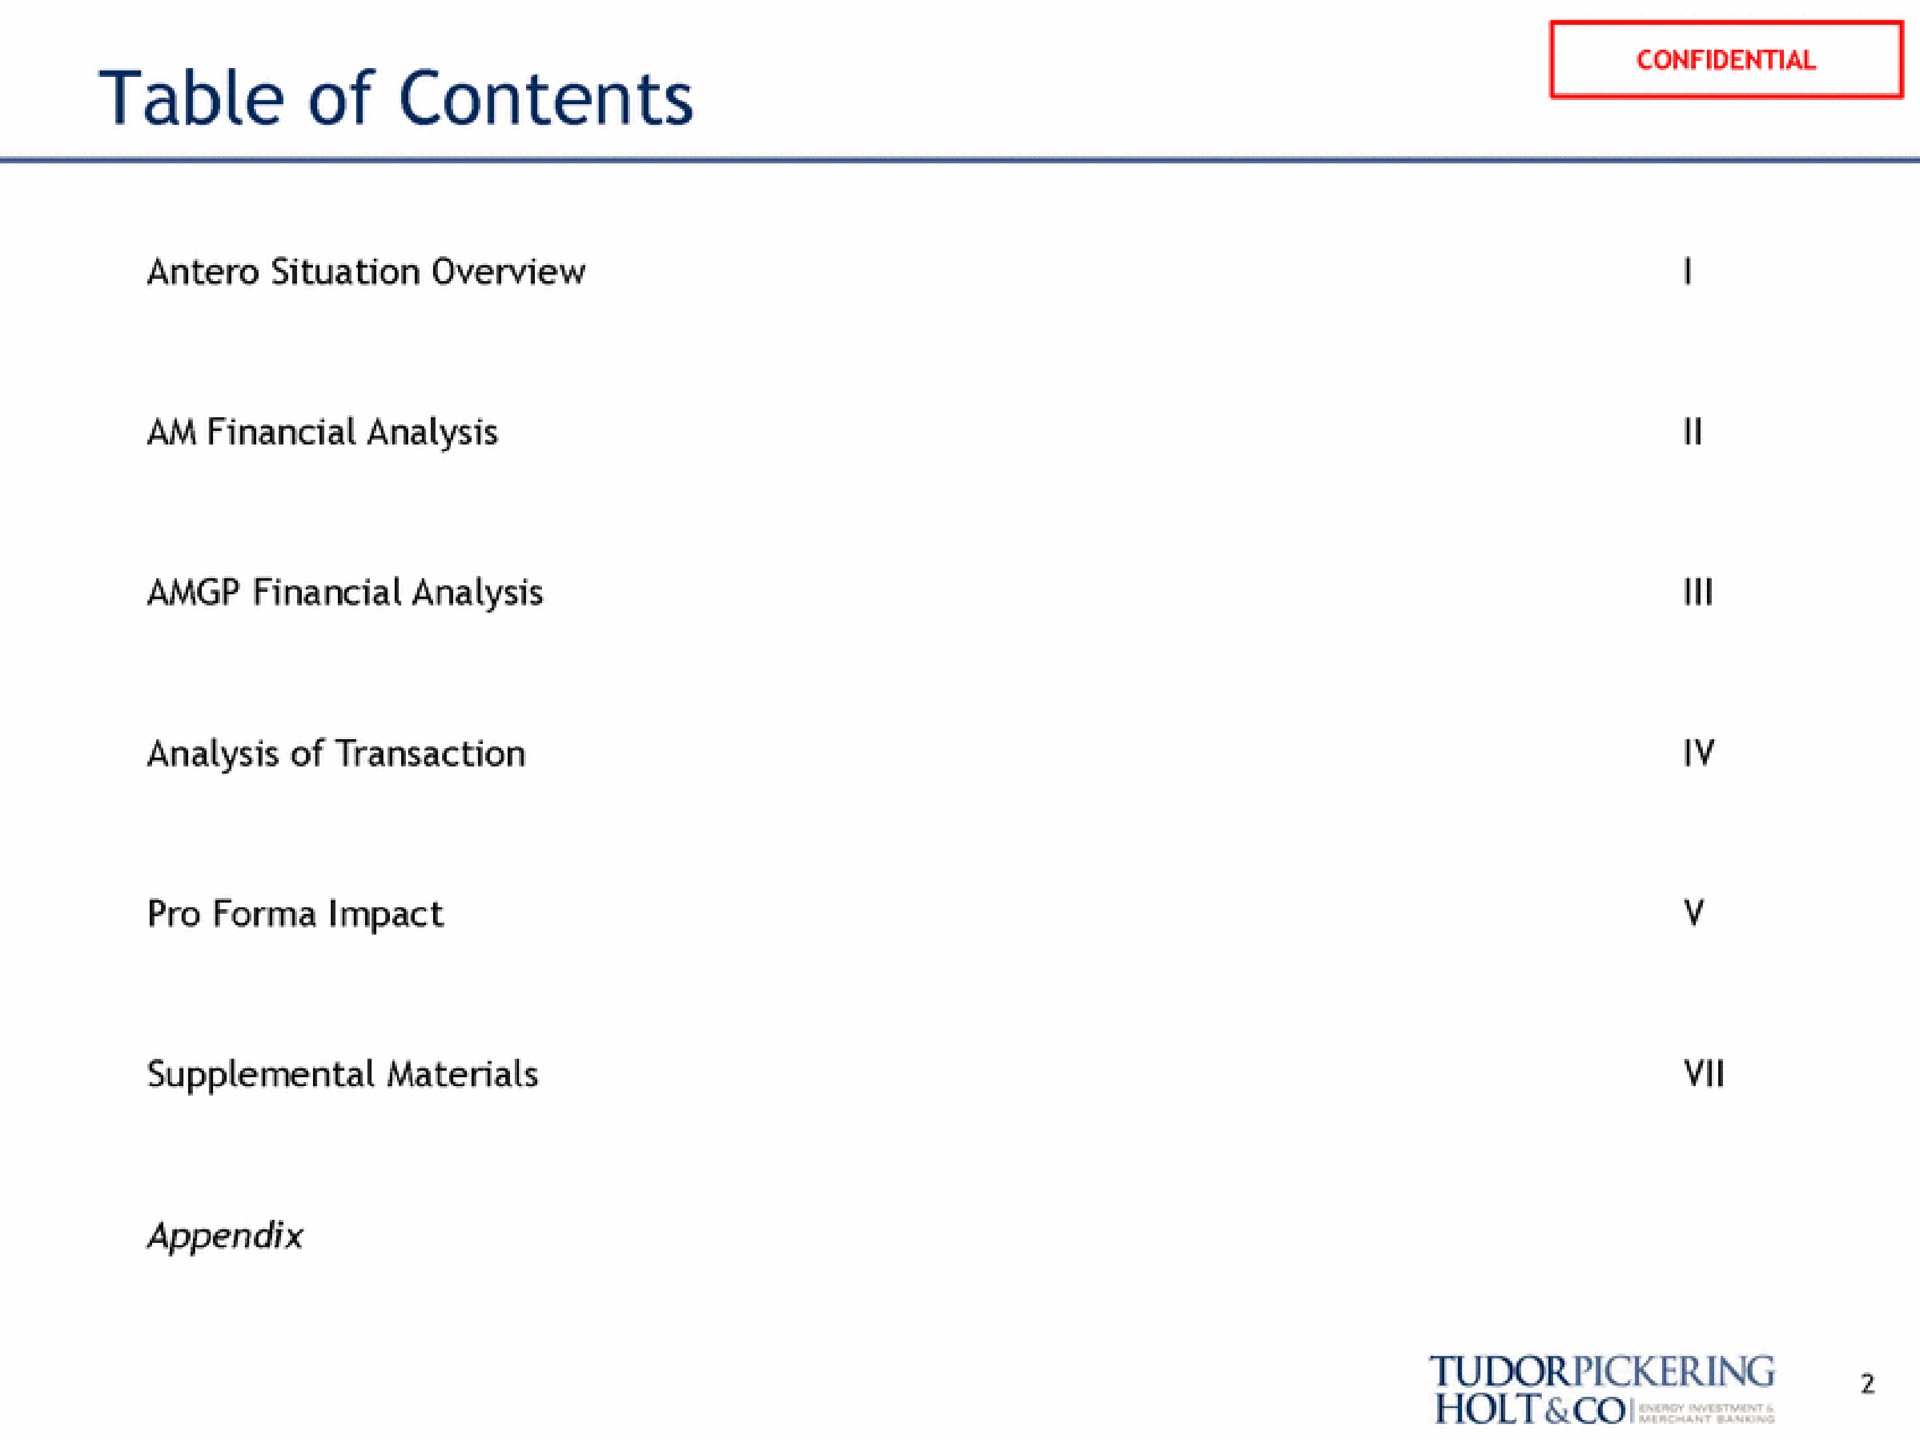 table of contents situation overview financial analysis pro impact supplemental materials appendix holt | Tudor, Pickering, Holt & Co